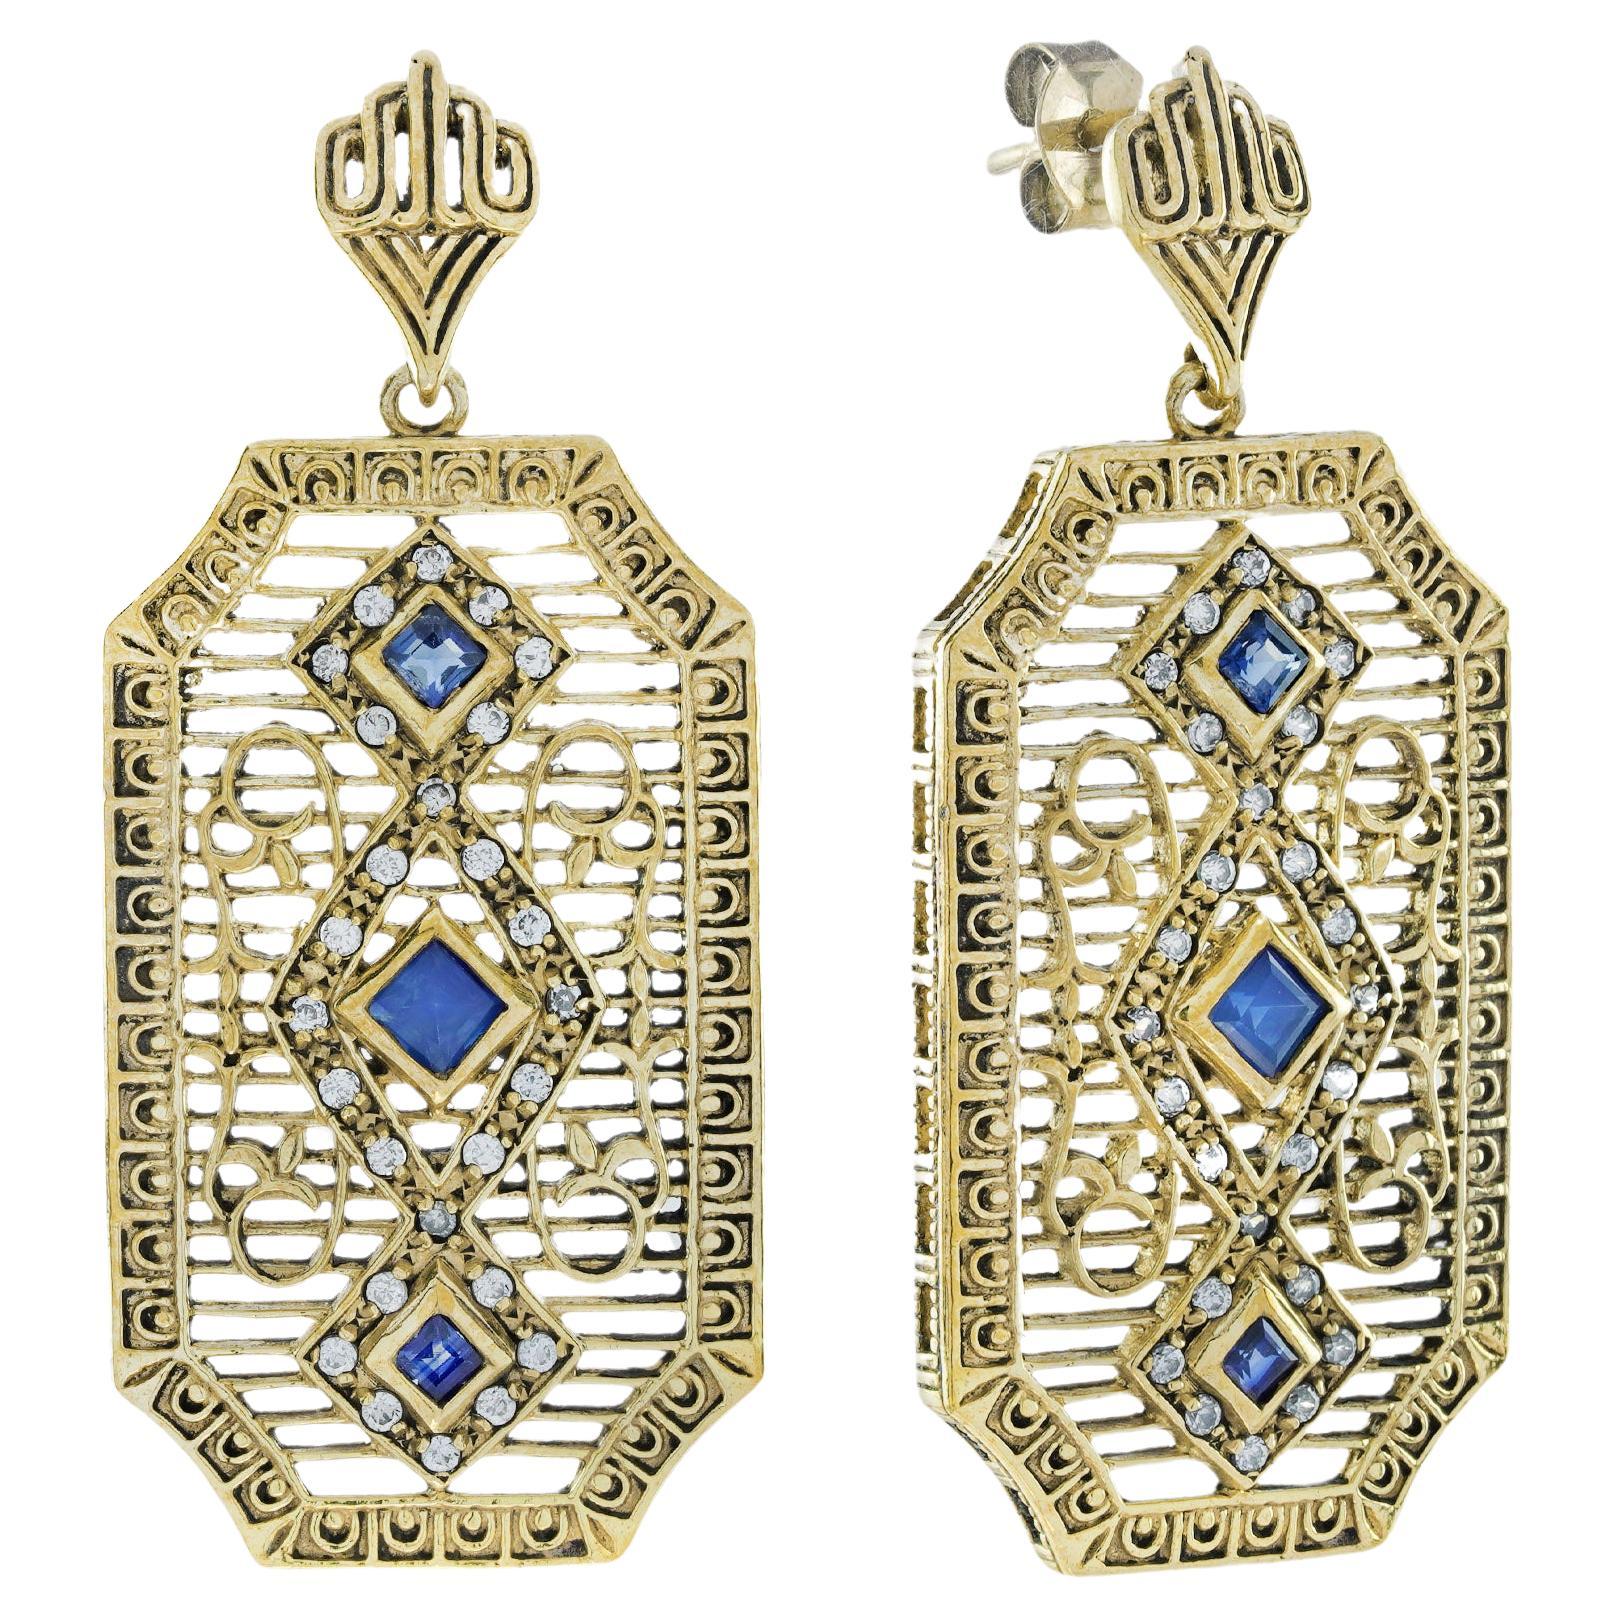 Natural Blue Sapphire Diamond Vintage Deco Style Filigree Earrings in 9K Gold